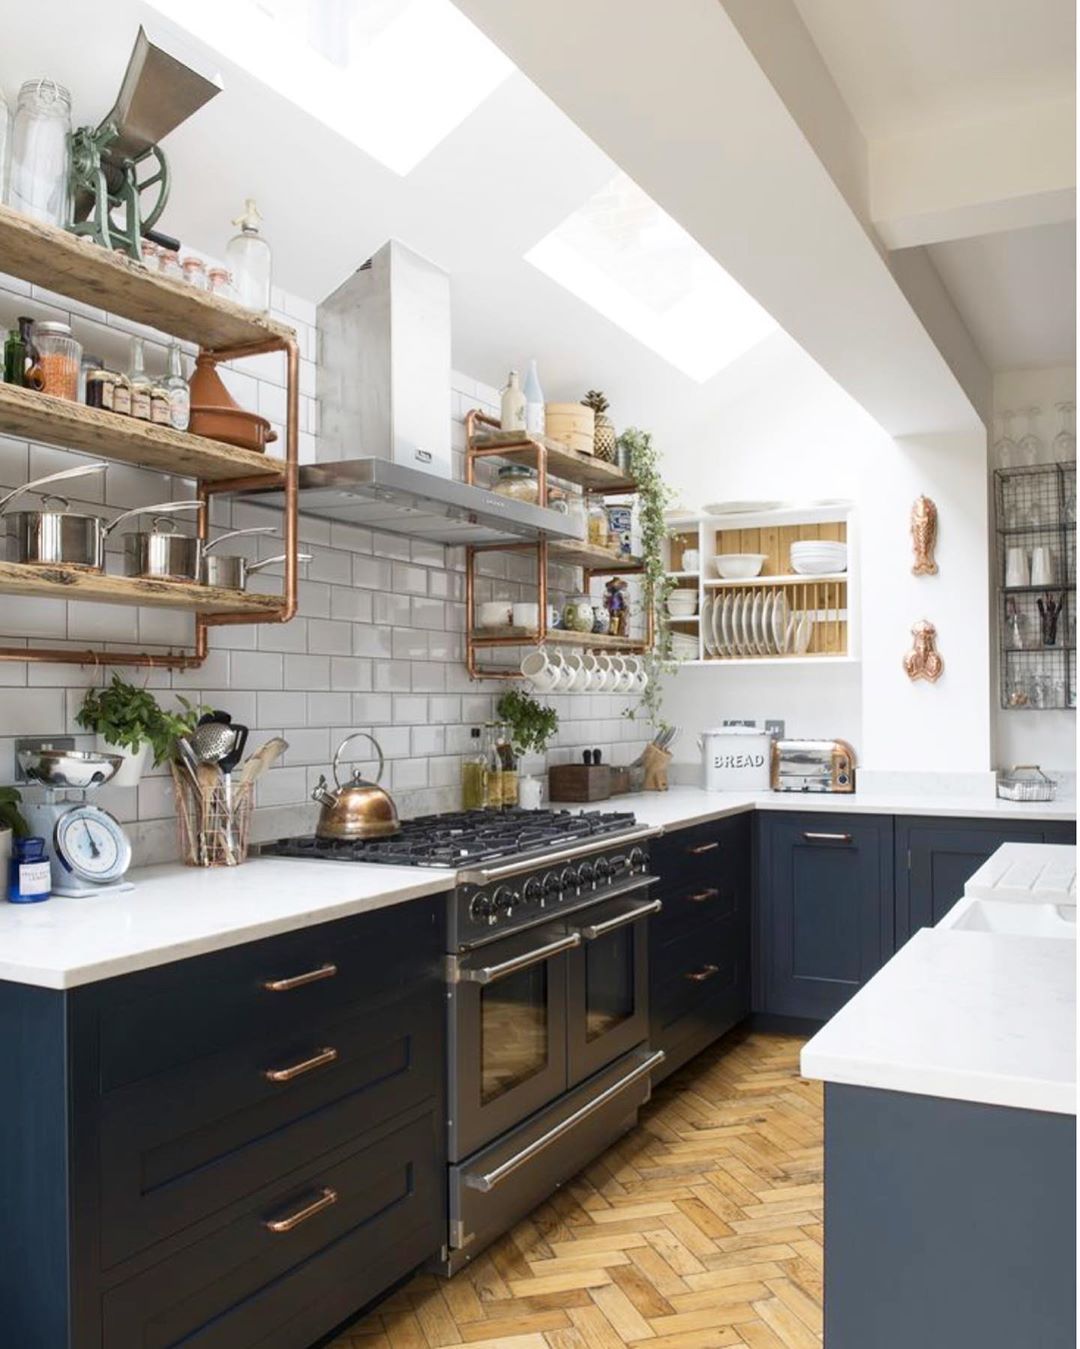 Galley-style kitchen with skylights and plants. Photo by Instagram user @erinthompsonco